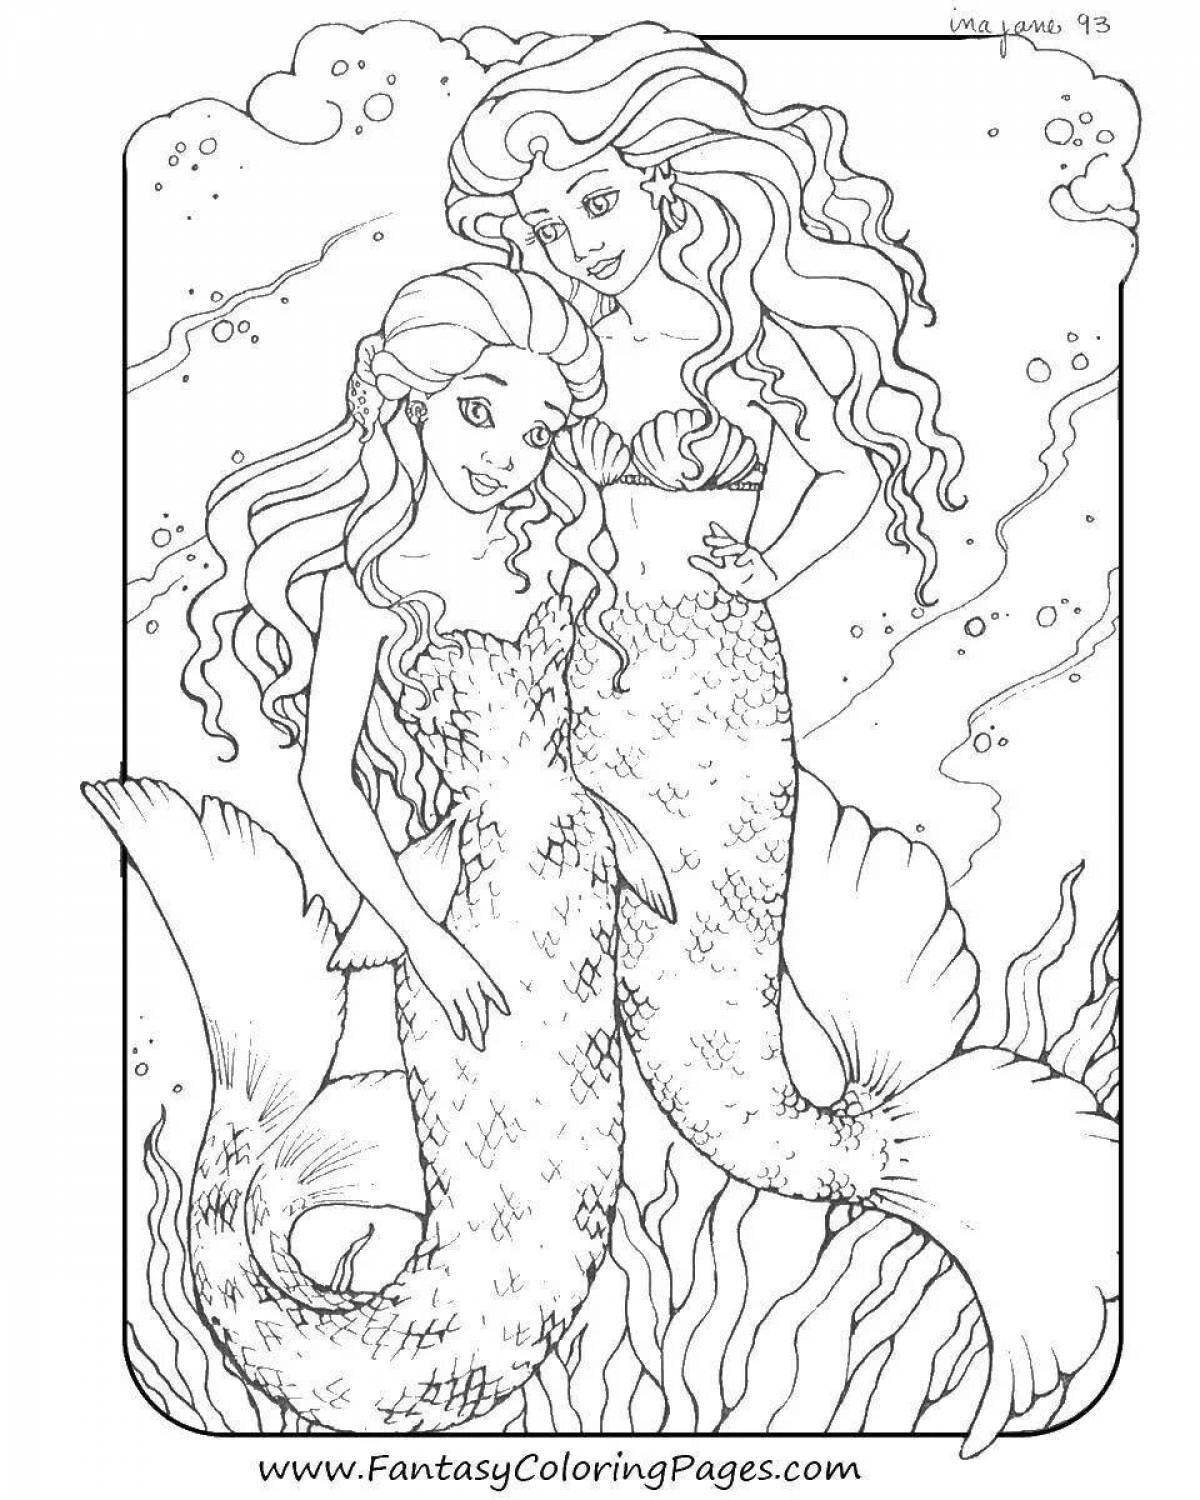 Sublime coloring page beautiful mermaid